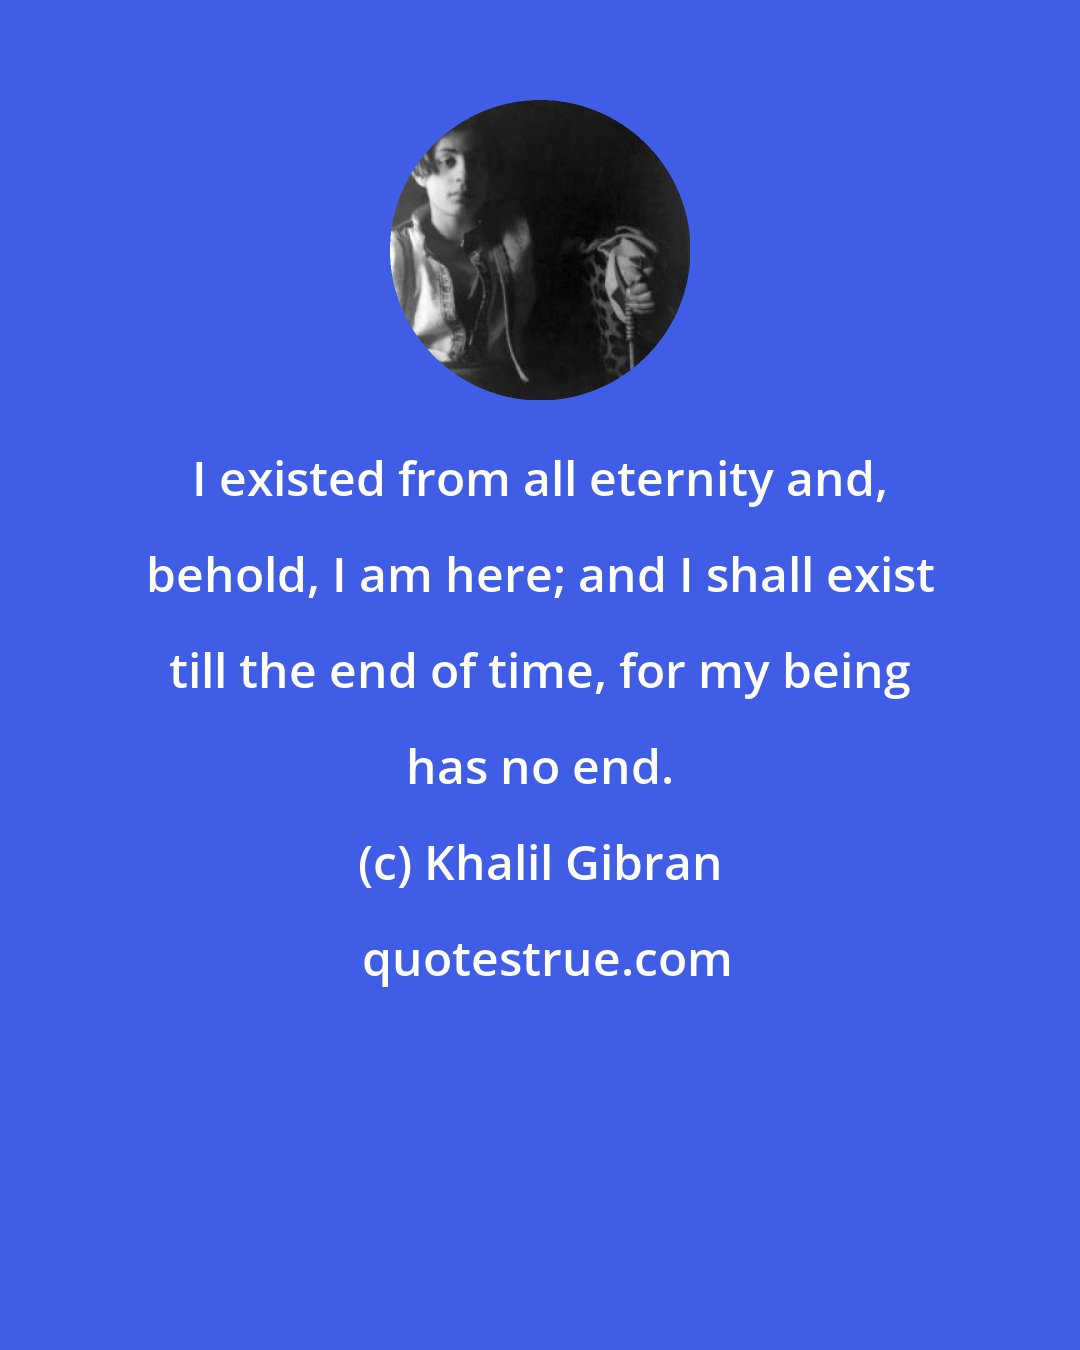 Khalil Gibran: I existed from all eternity and, behold, I am here; and I shall exist till the end of time, for my being has no end.